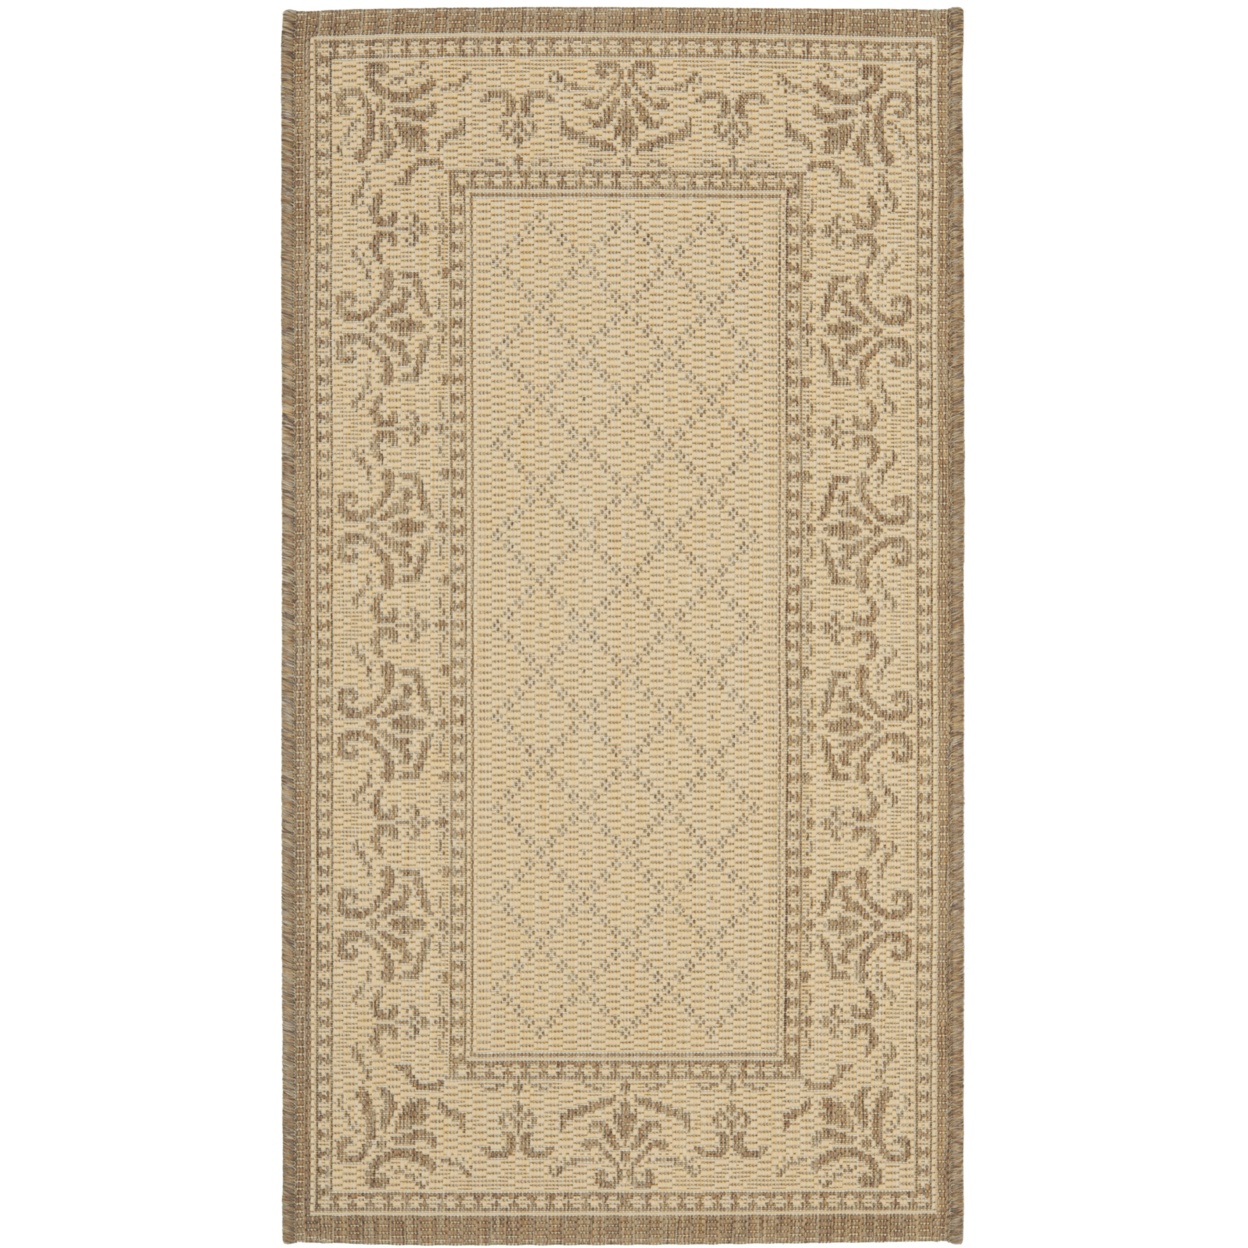 SAFAVIEH Outdoor CY0901-3001 Courtyard Natural / Brown Rug - 9' X 12'